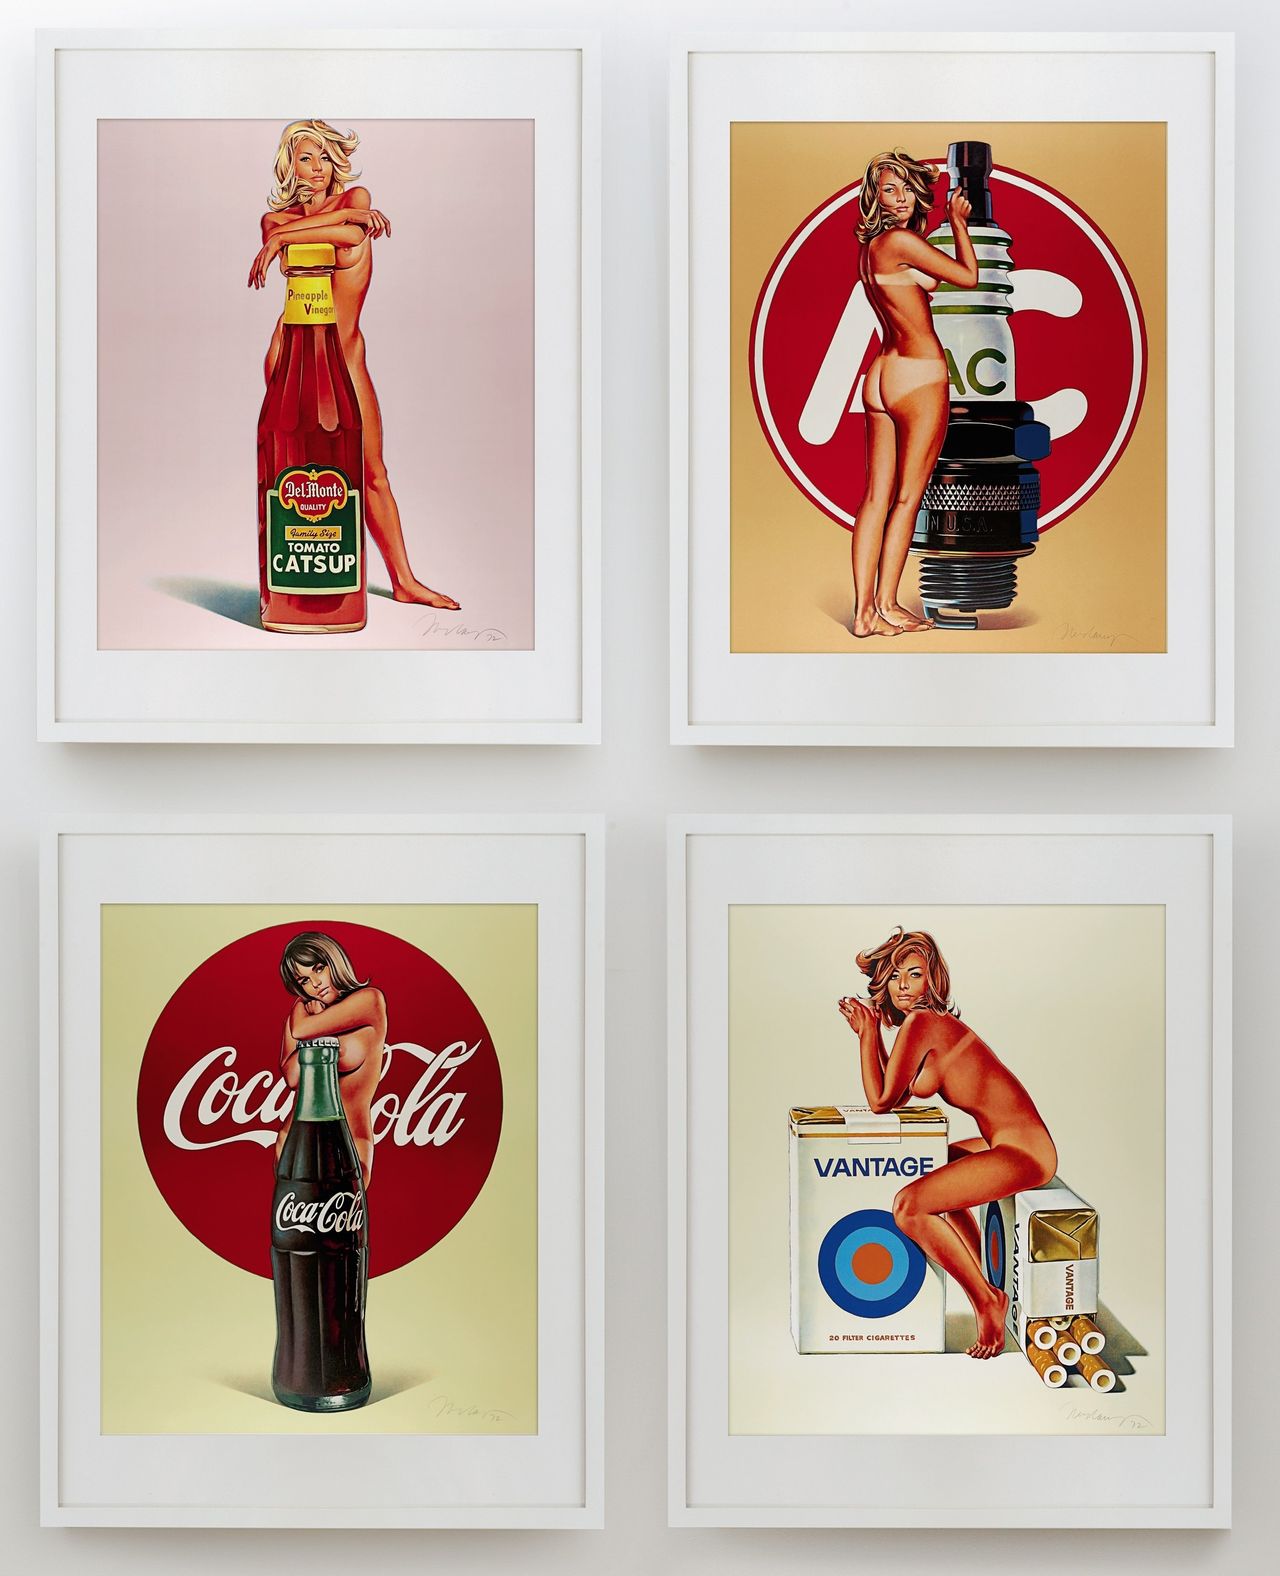 Mel Ramos, "Tomato Catsup; Tobacco Red; Lola Cola; and A.C. Annie," 1971-1972. (Est. £5,000 to £7,000.)